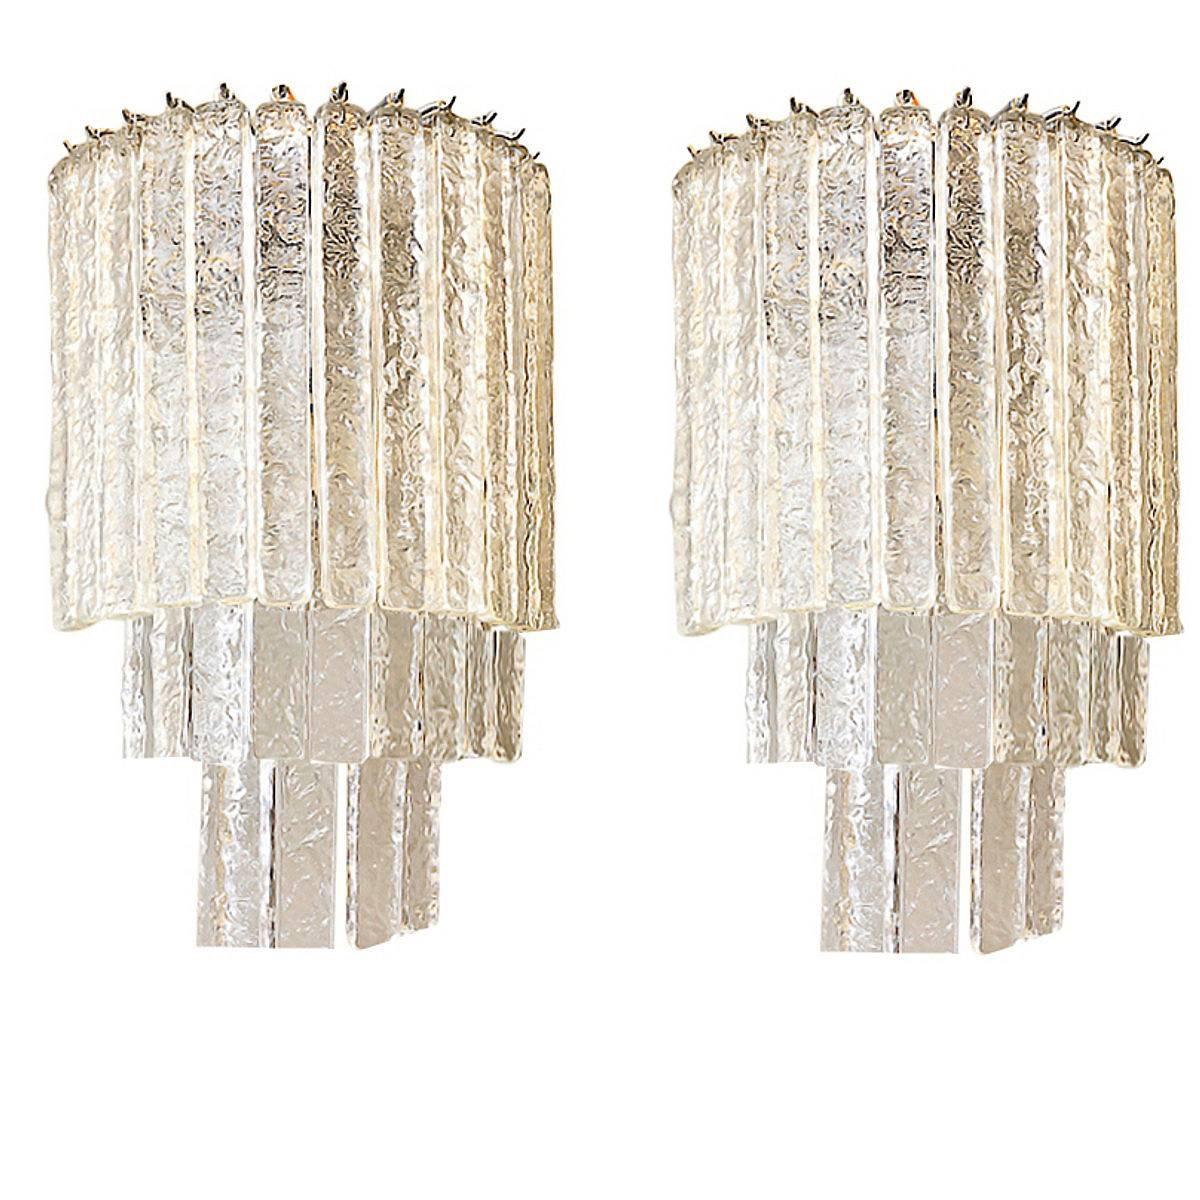 Monumental Pair of Murano Icy Glass Midcentury Sconces